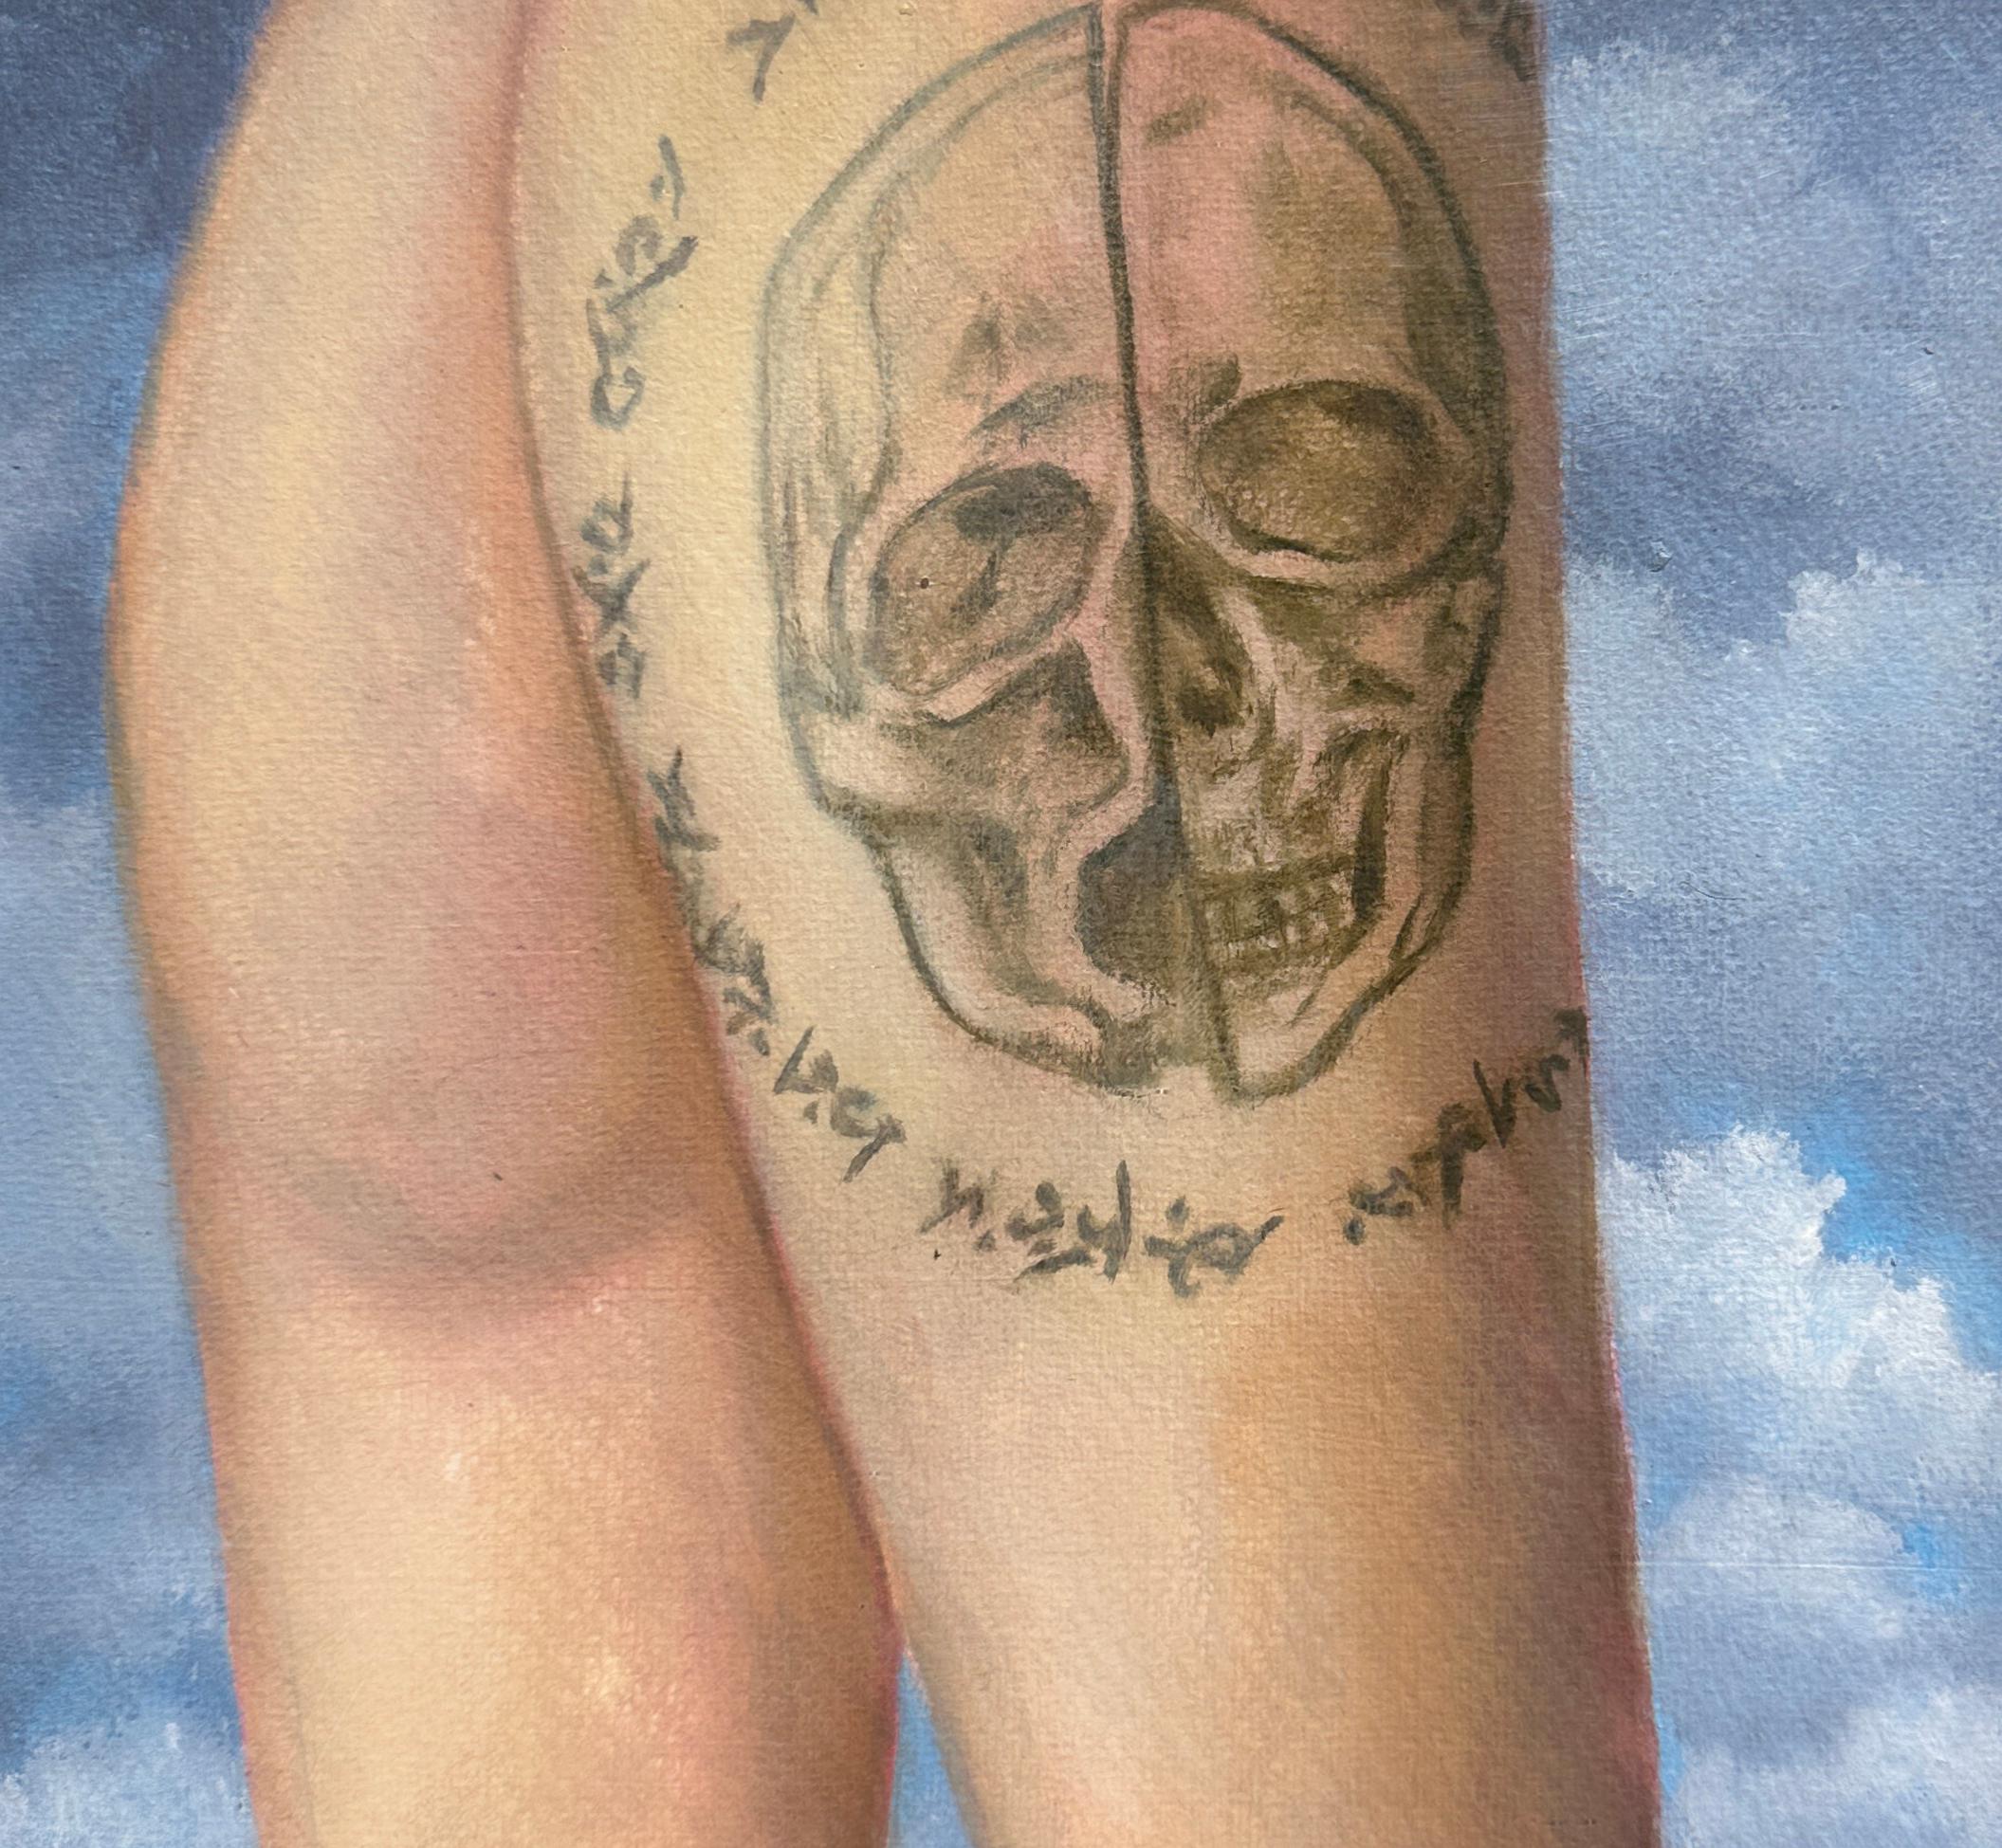 Exegesis - Dancer's Legs Emblazoned with a Skull Tattoo, Oil & Acrylic on Paper - Painting by Juan Barragán